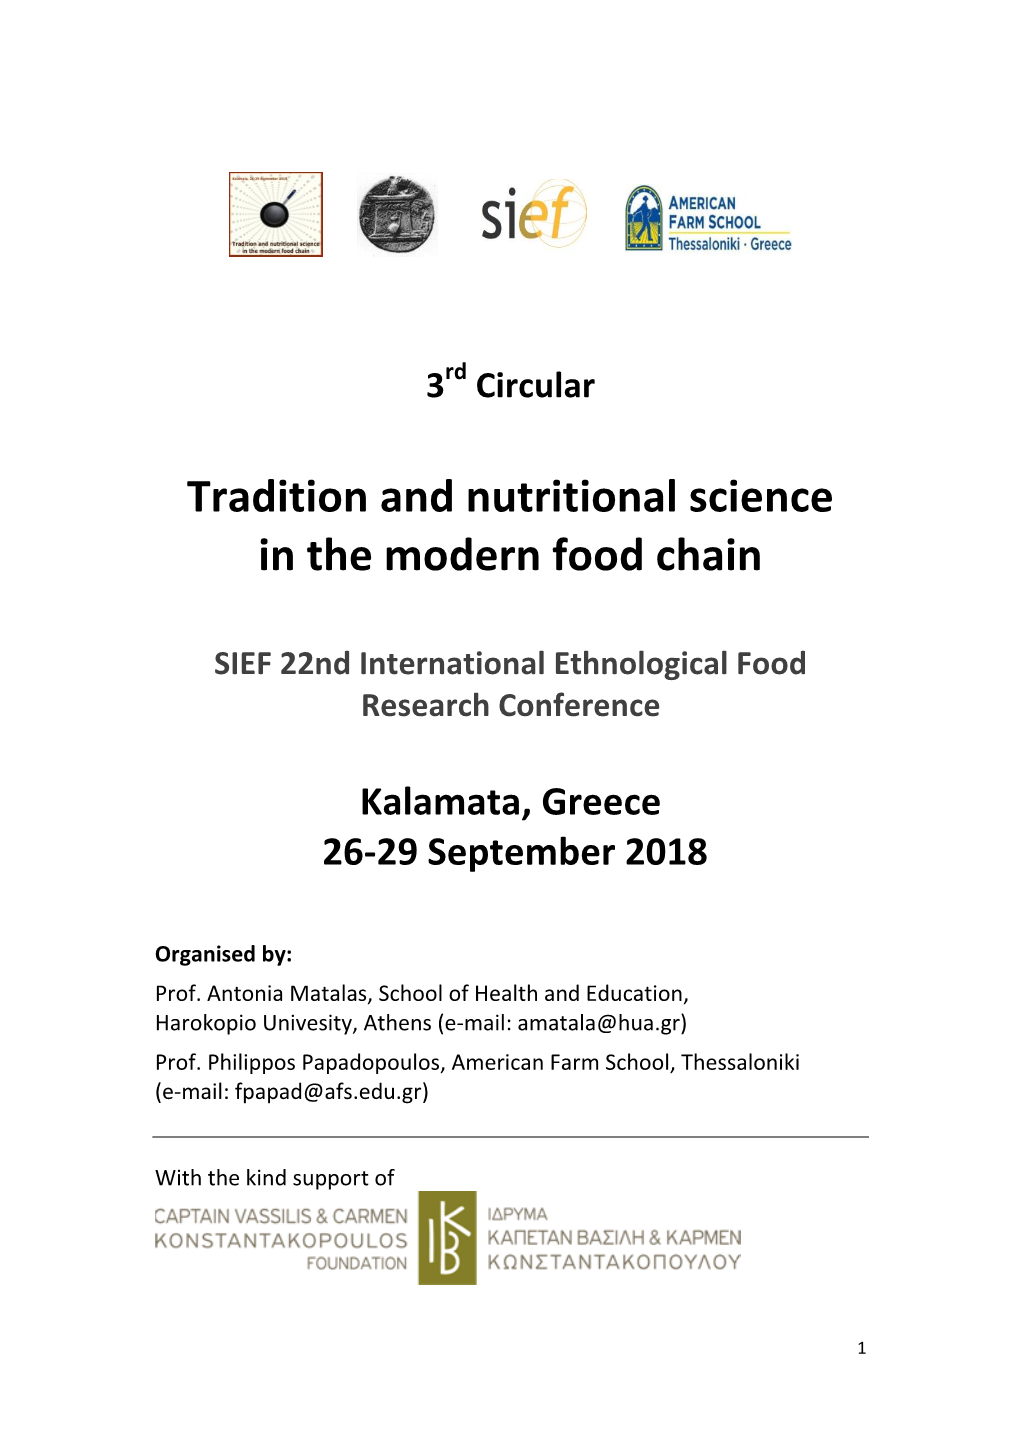 Tradition and Nutritional Science in the Modern Food Chain